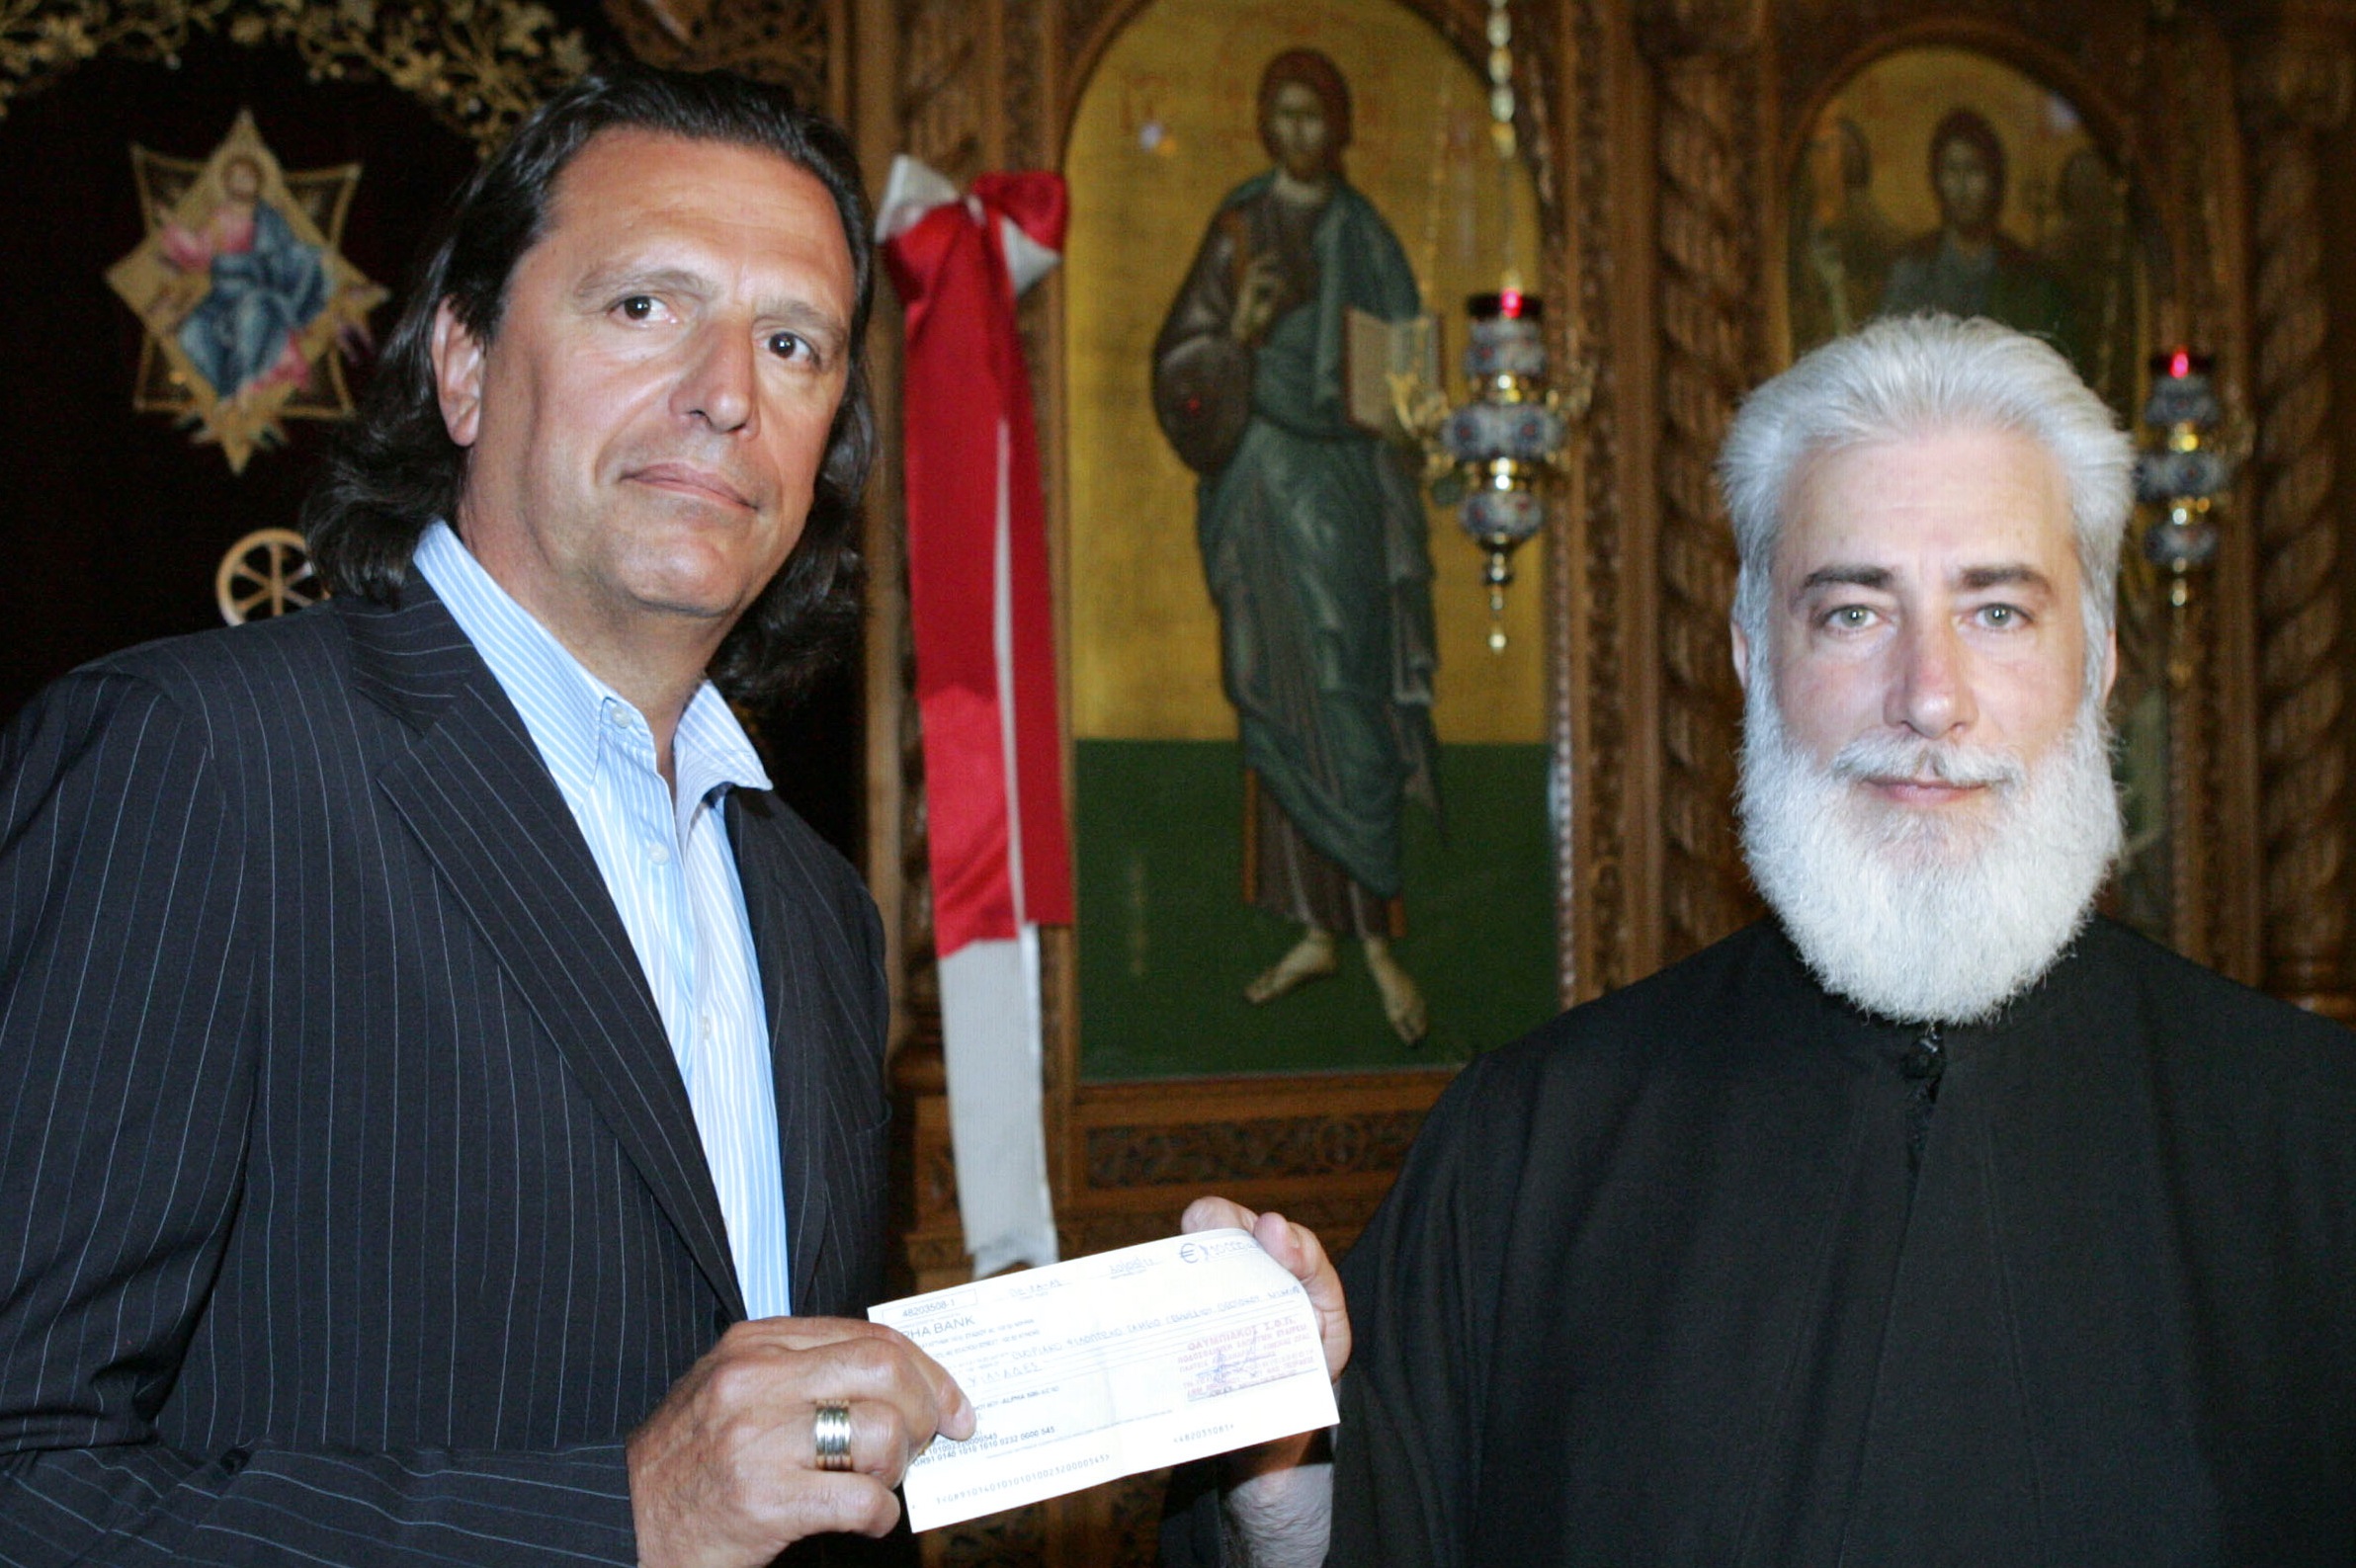 Financial aid for the provision of the soup kitchen organized by the “Genesios Theotokos” parish in Nikaia